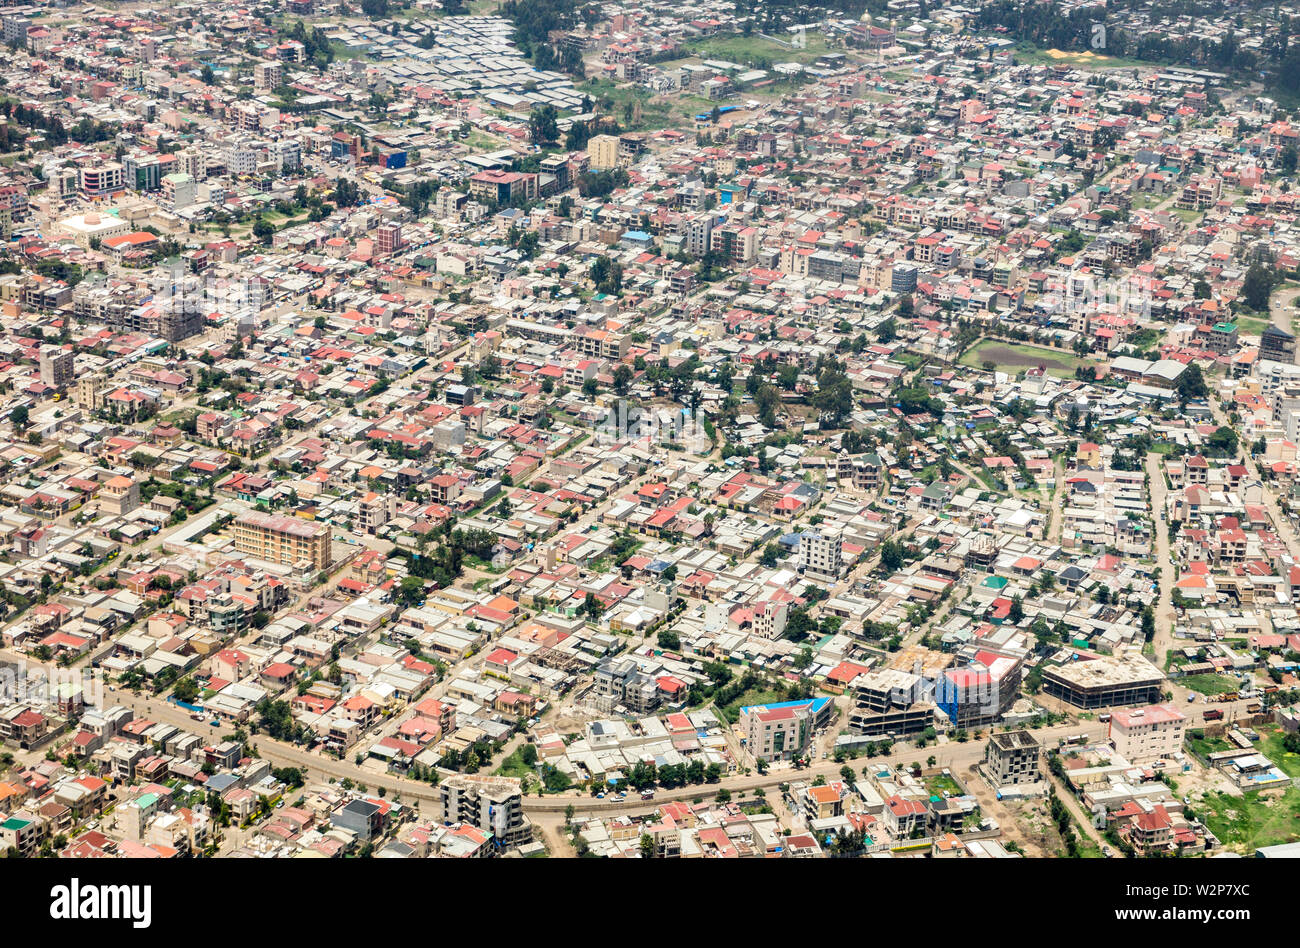 Aerial photo of Urban sprawl with new housing in a suburb of Addis Ababa, Ethiopia Stock Photo